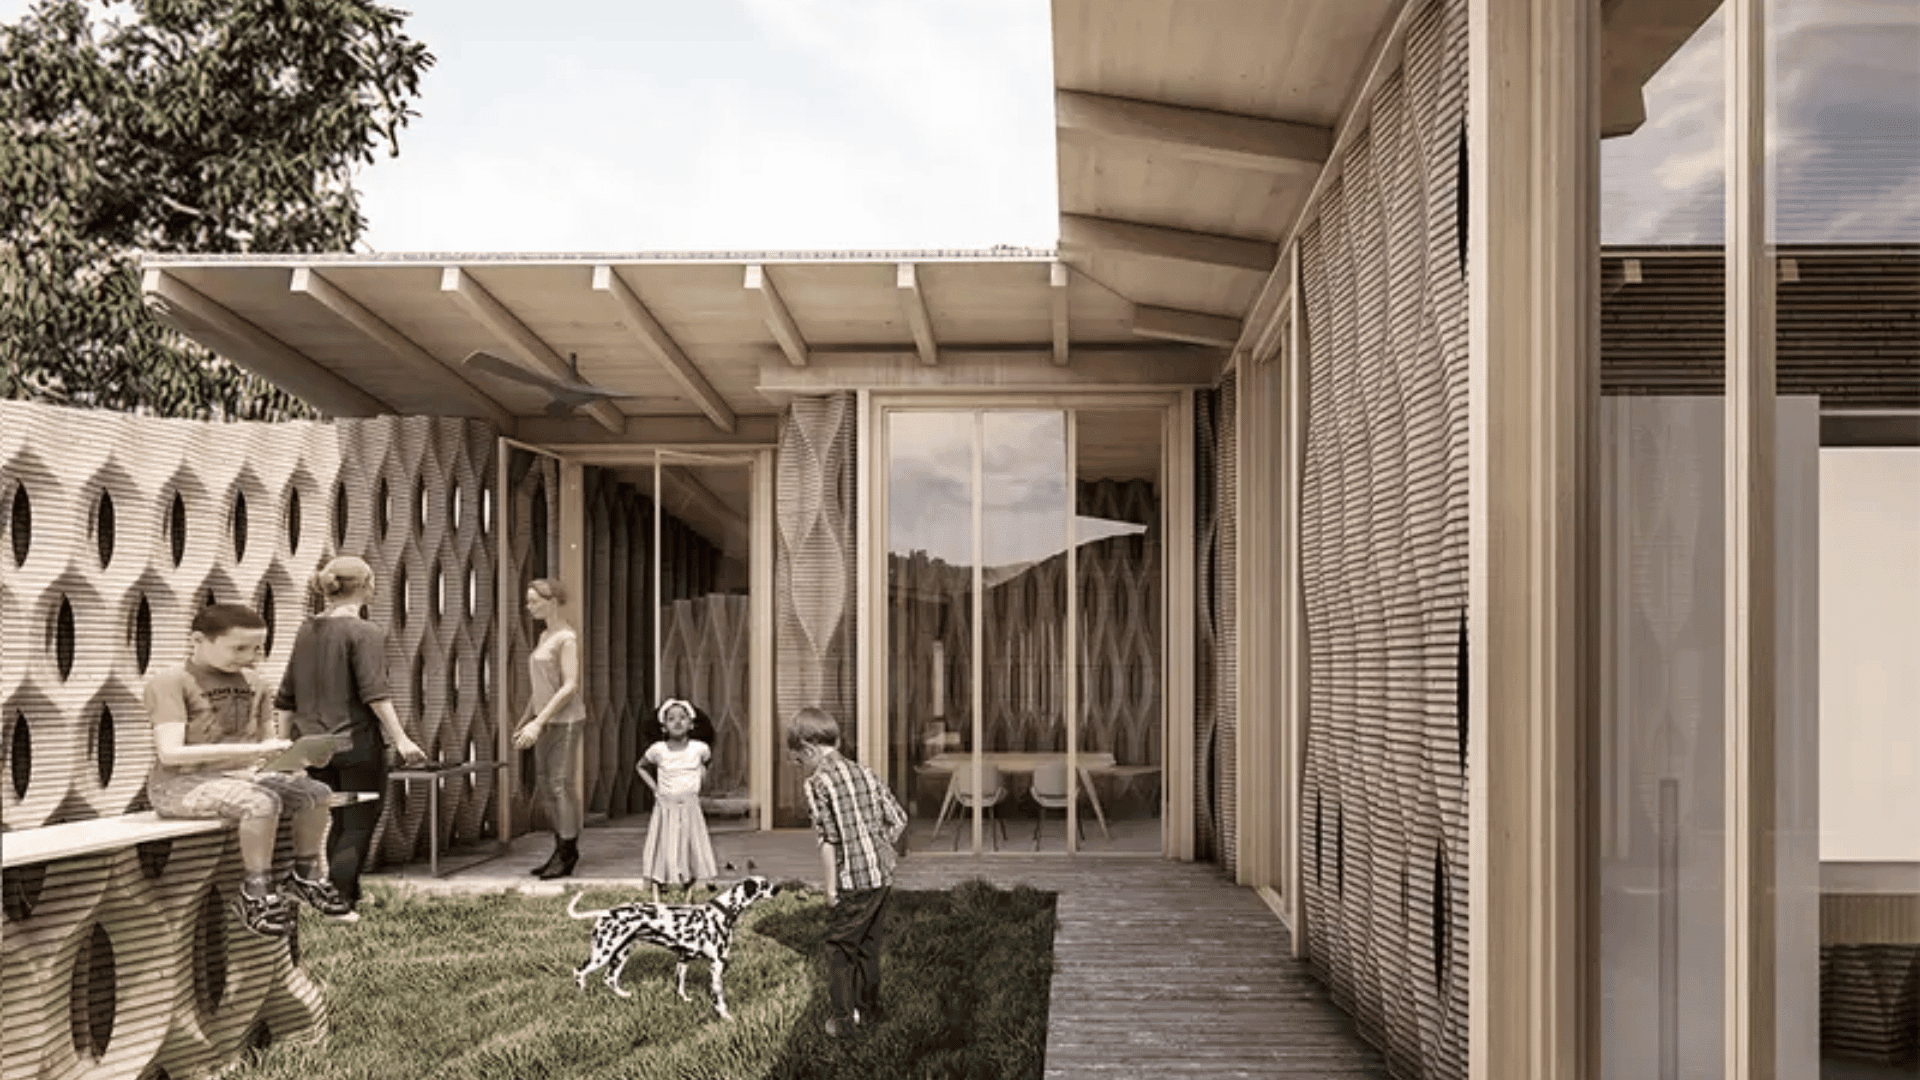 Icon's Contest to Build 3D Printed Homes for less than $99,000 Each